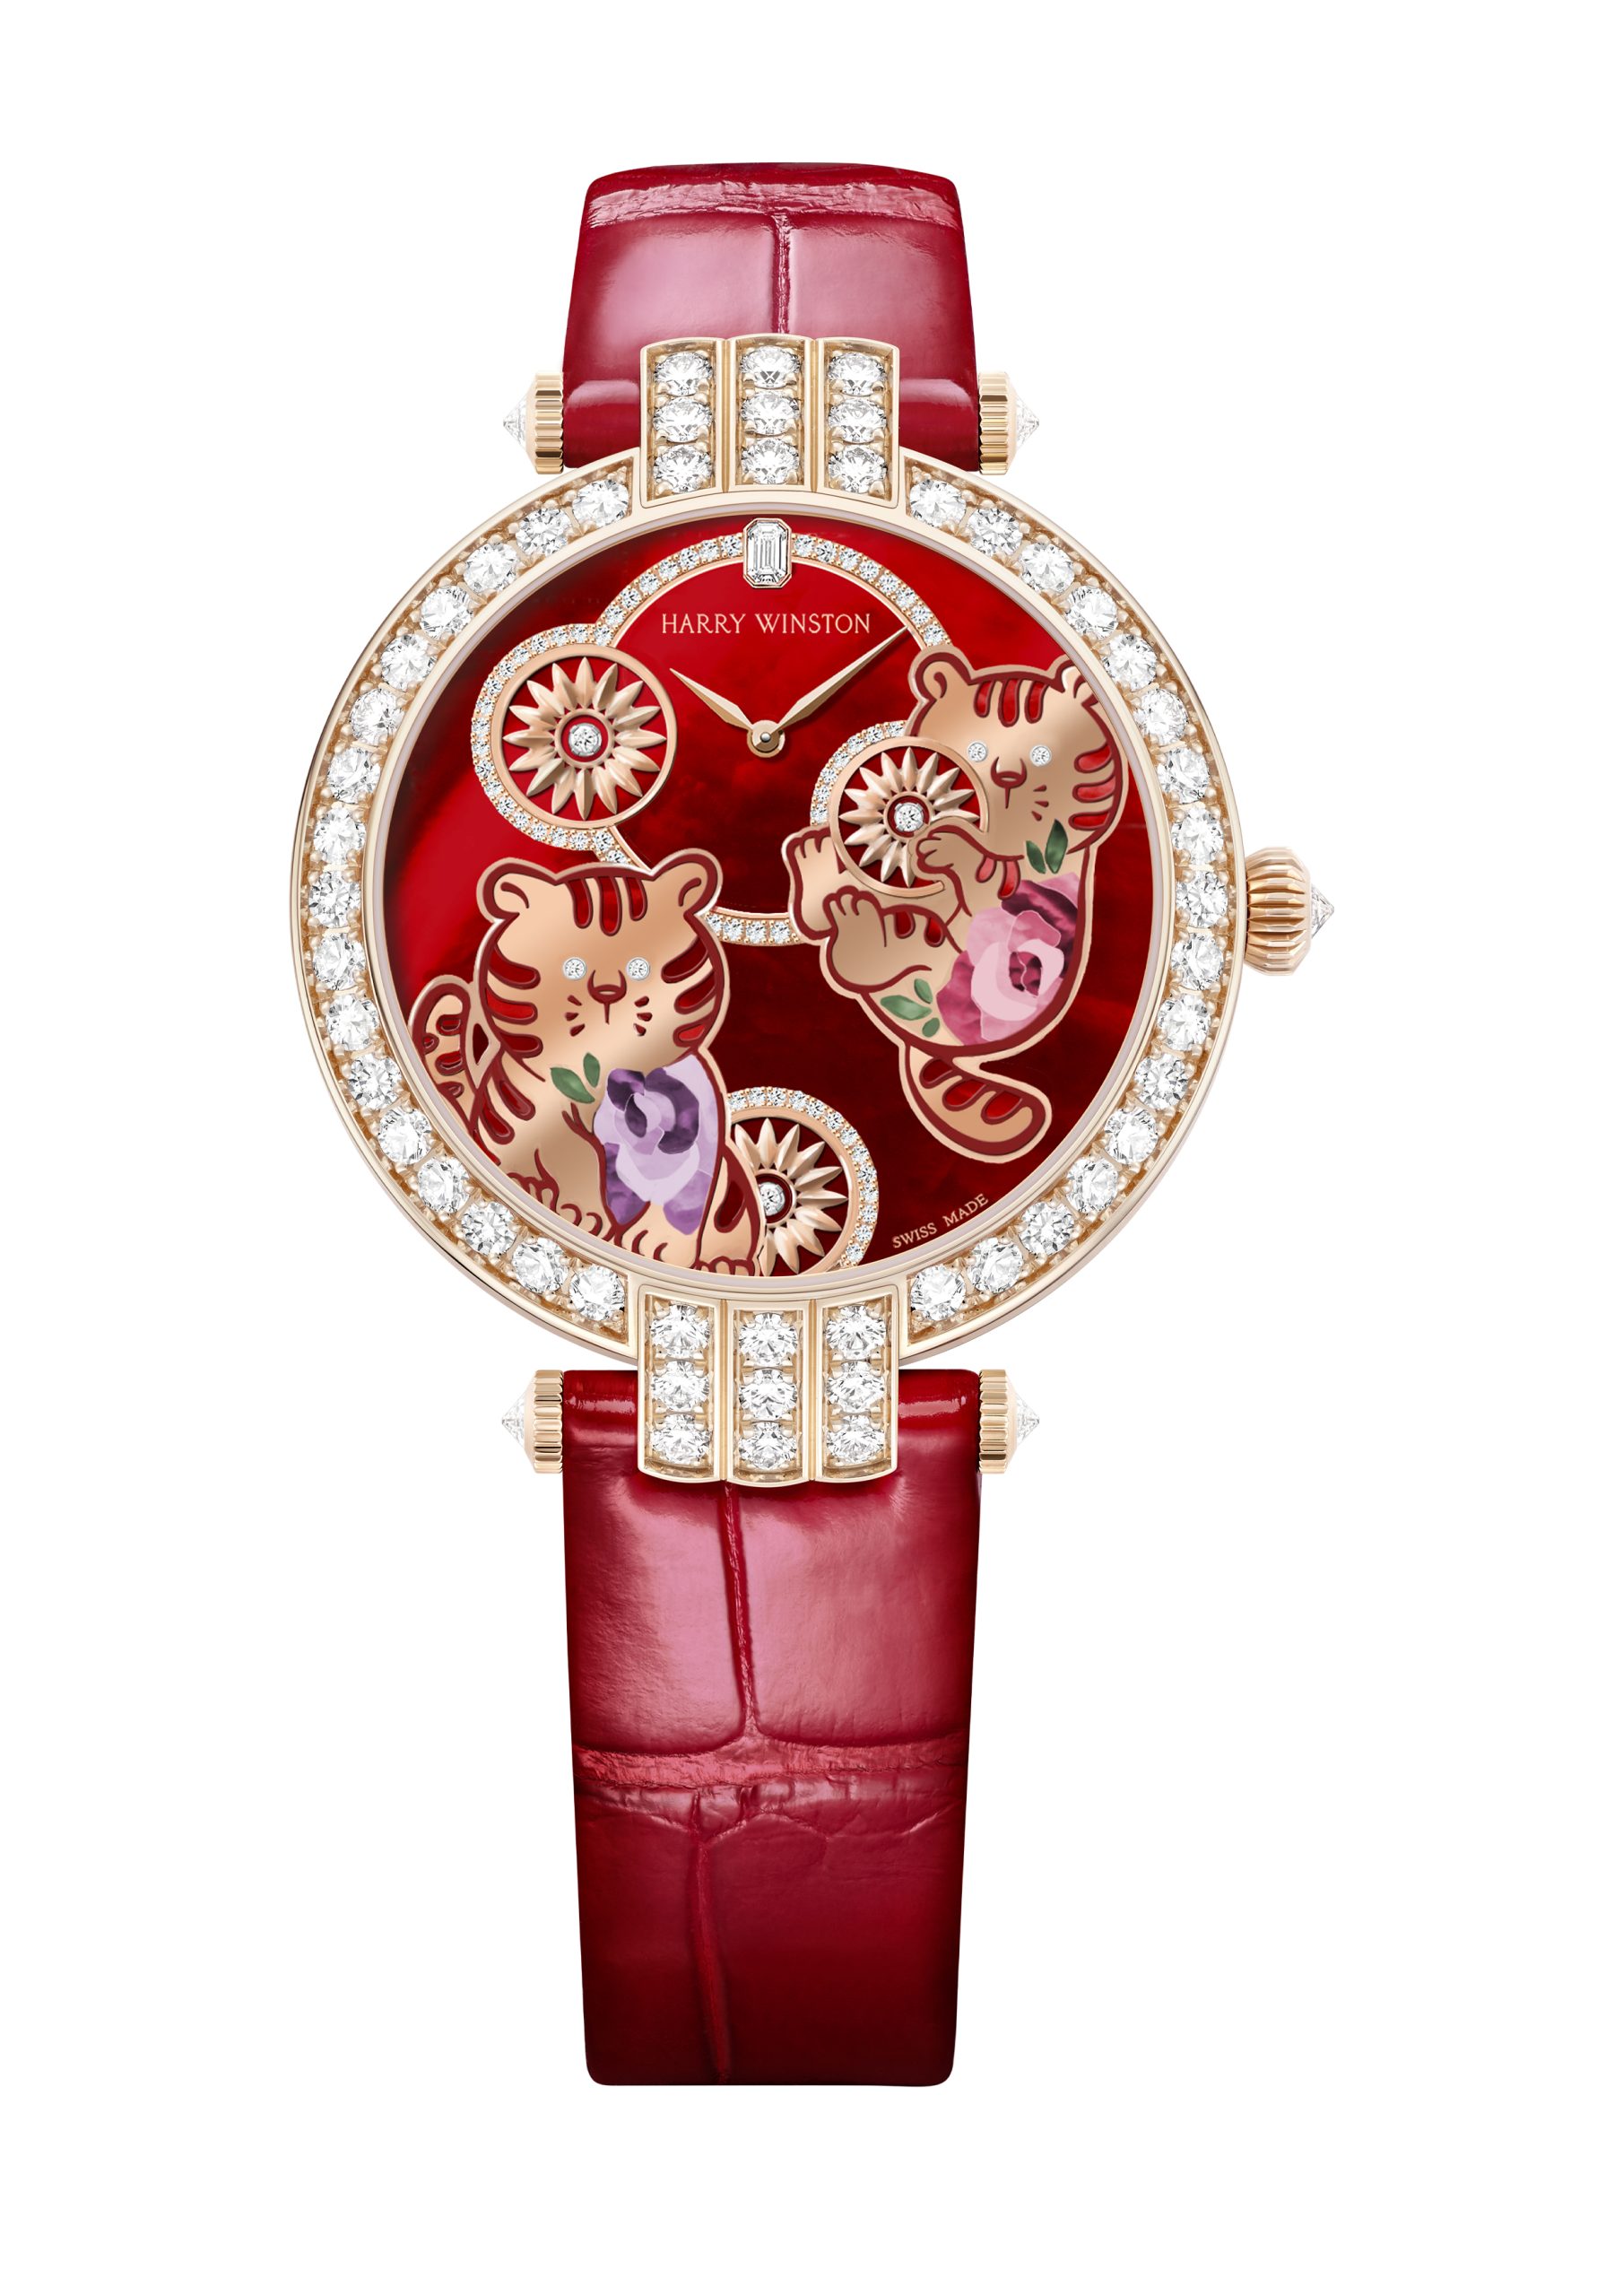 Harry Winston Premier Year of the Tiger watch 